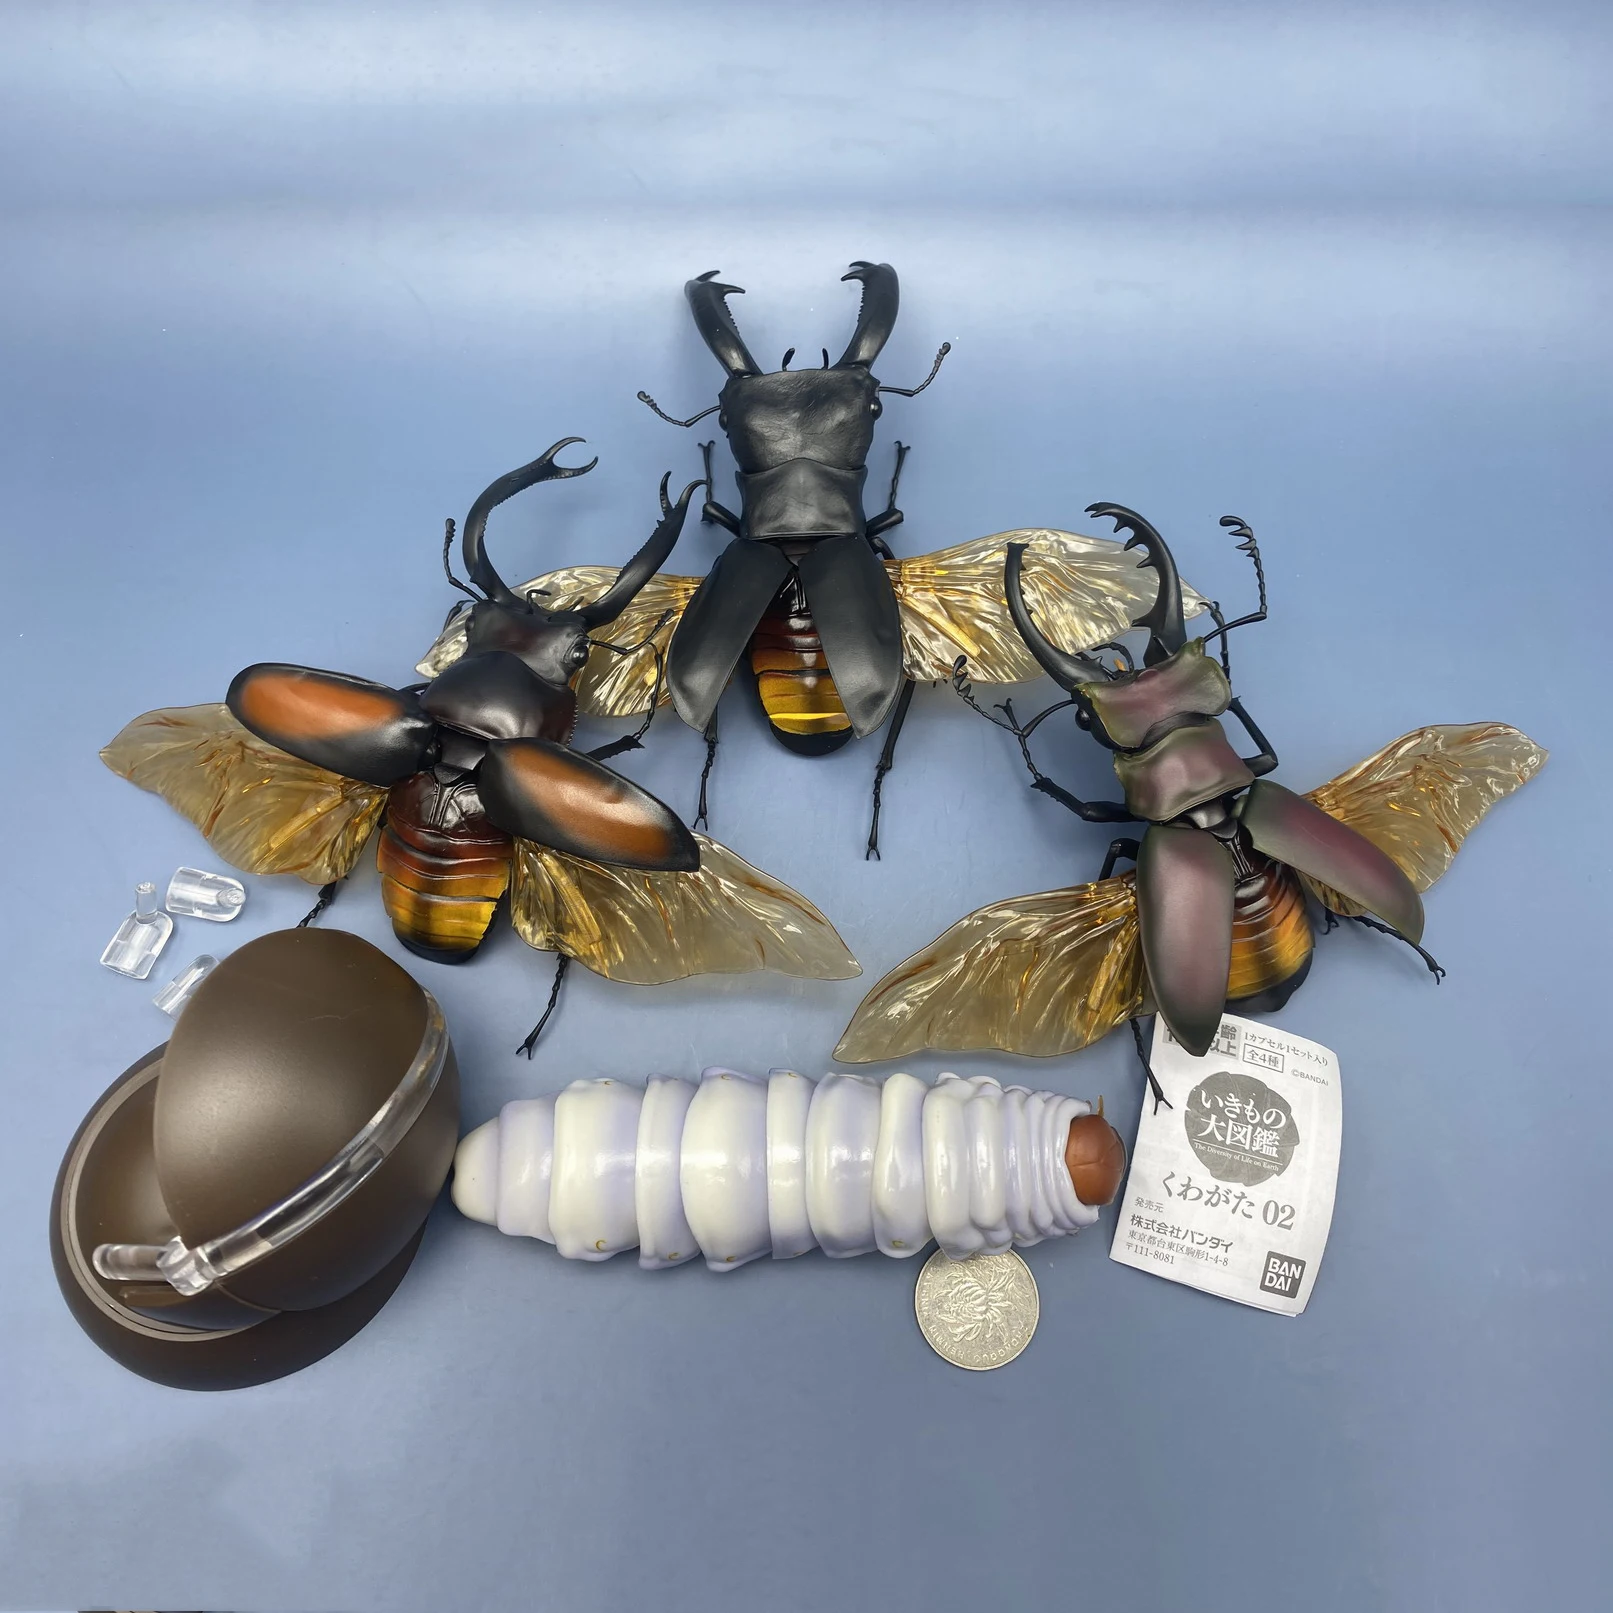 

Bandai Genuine Insect Simulation Model Gashapon Toys Stag Beetle Unicorn Joints Movable Model Ornament Toys Children Gifts